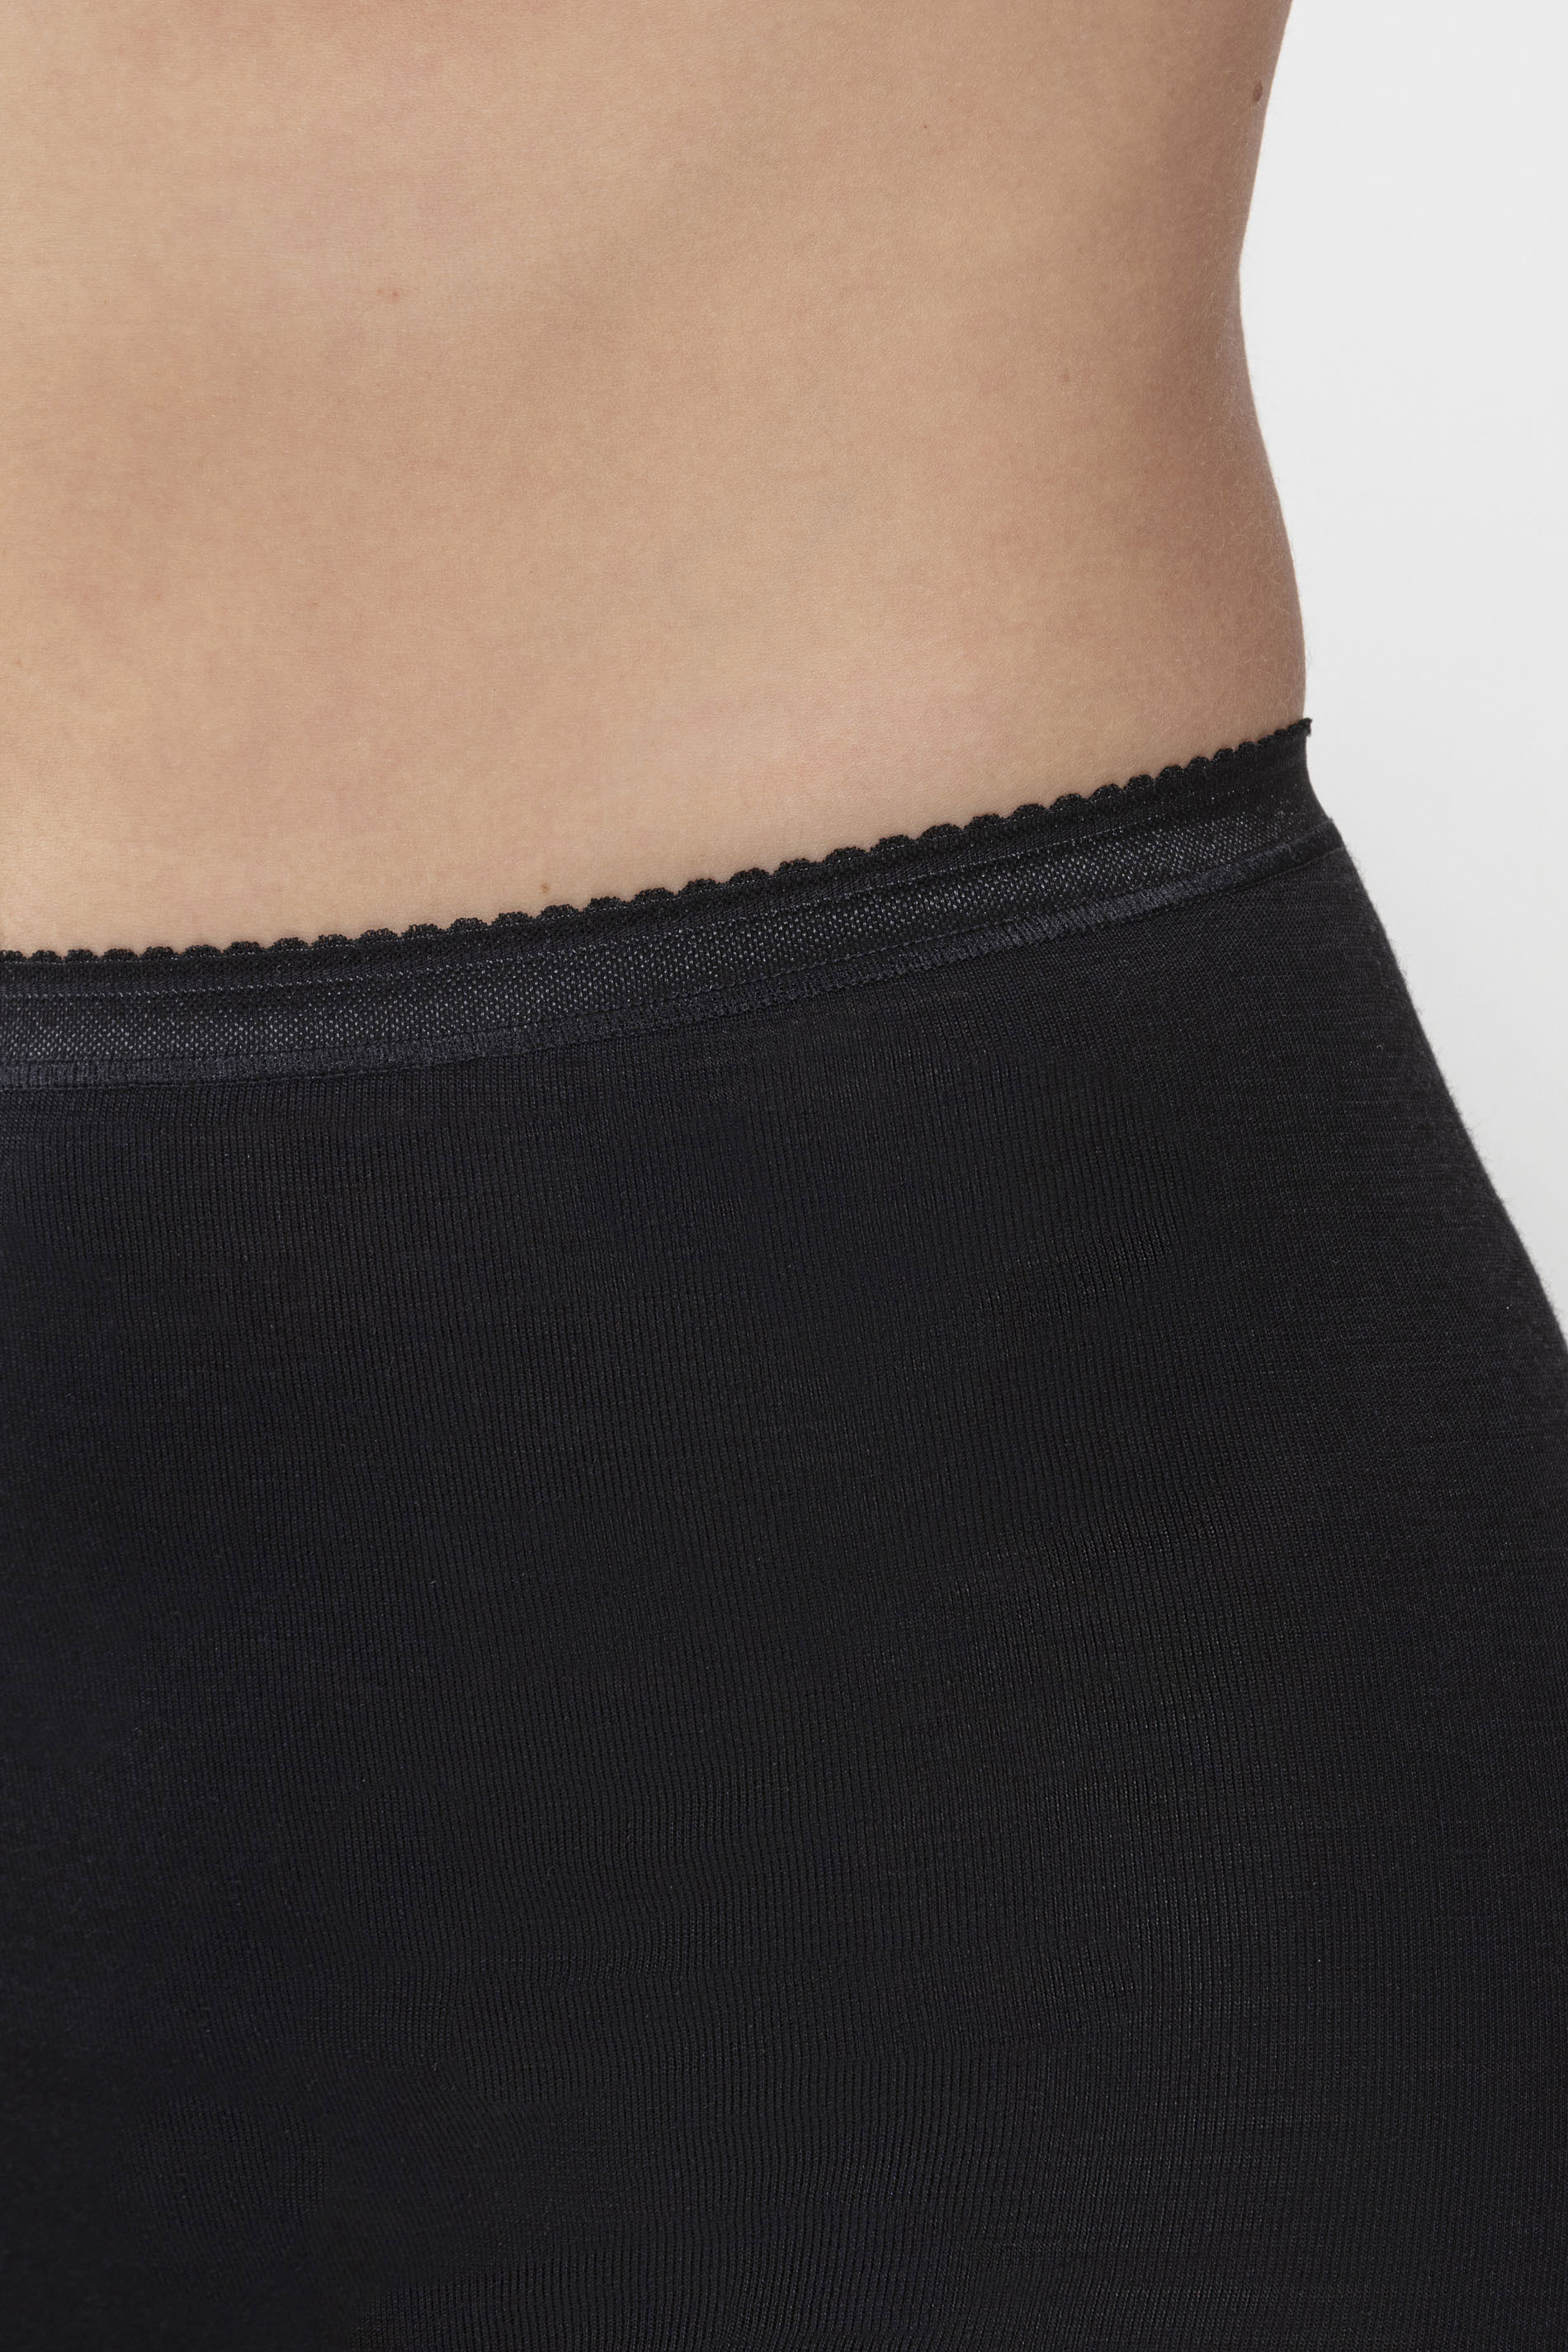 Panty Black Serie Exquisite Detail View 01 | mey®